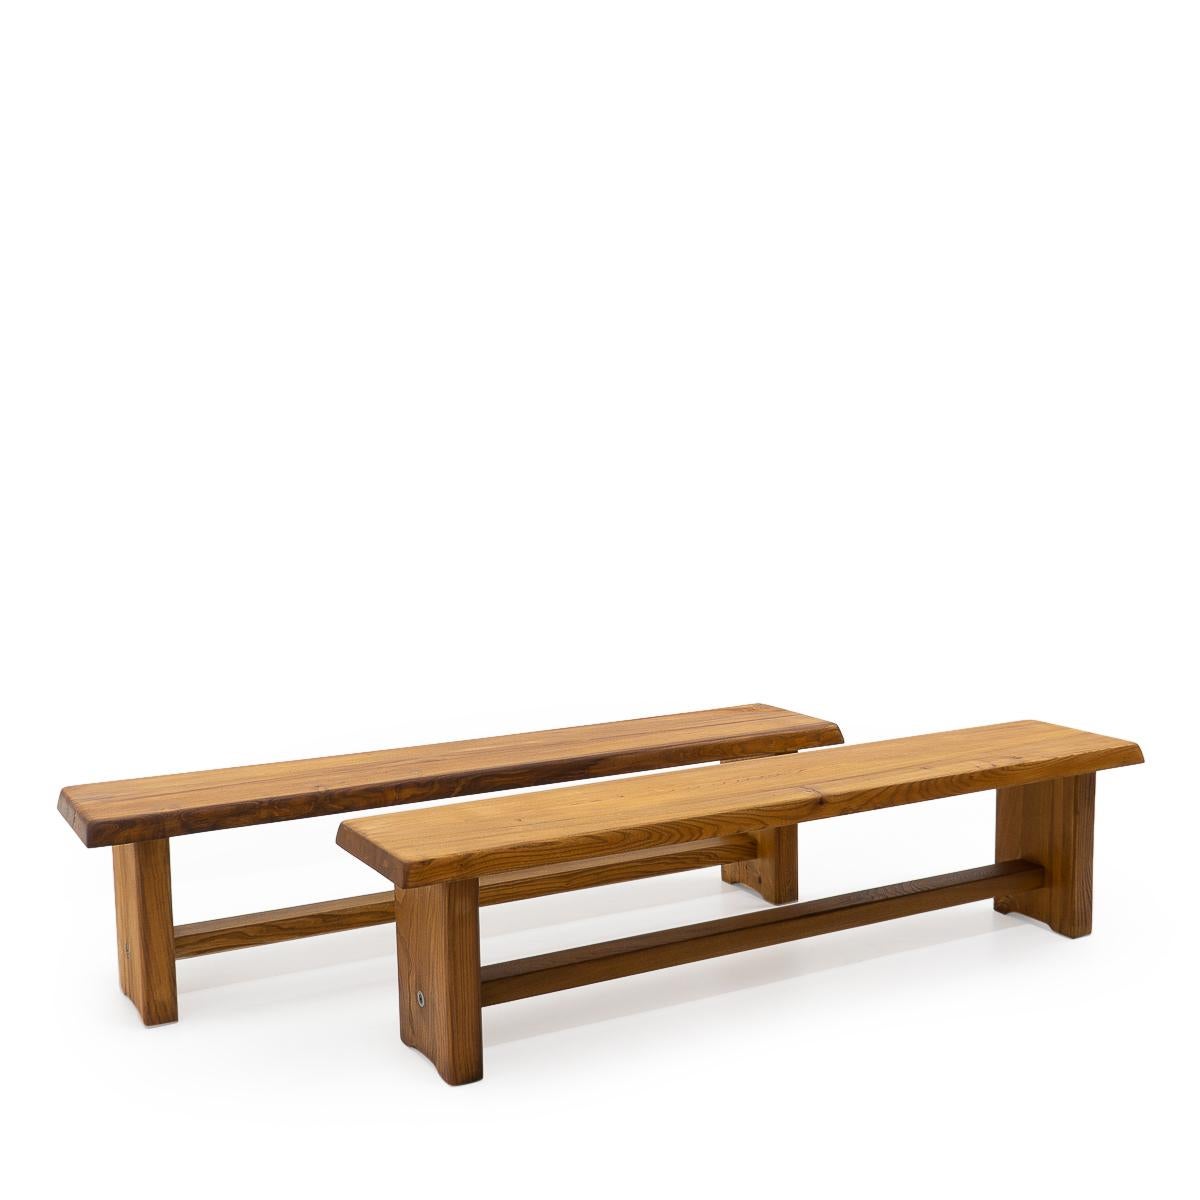 Vintage Pierre Chapo S14 “Banc à piliers pour trois”: Three-seat bench in elm. 

Would work great as an end of bed bench.

As with all furniture by Chapo, this piece shows excellent craftsmanship, is constructed in solid wood and was made to